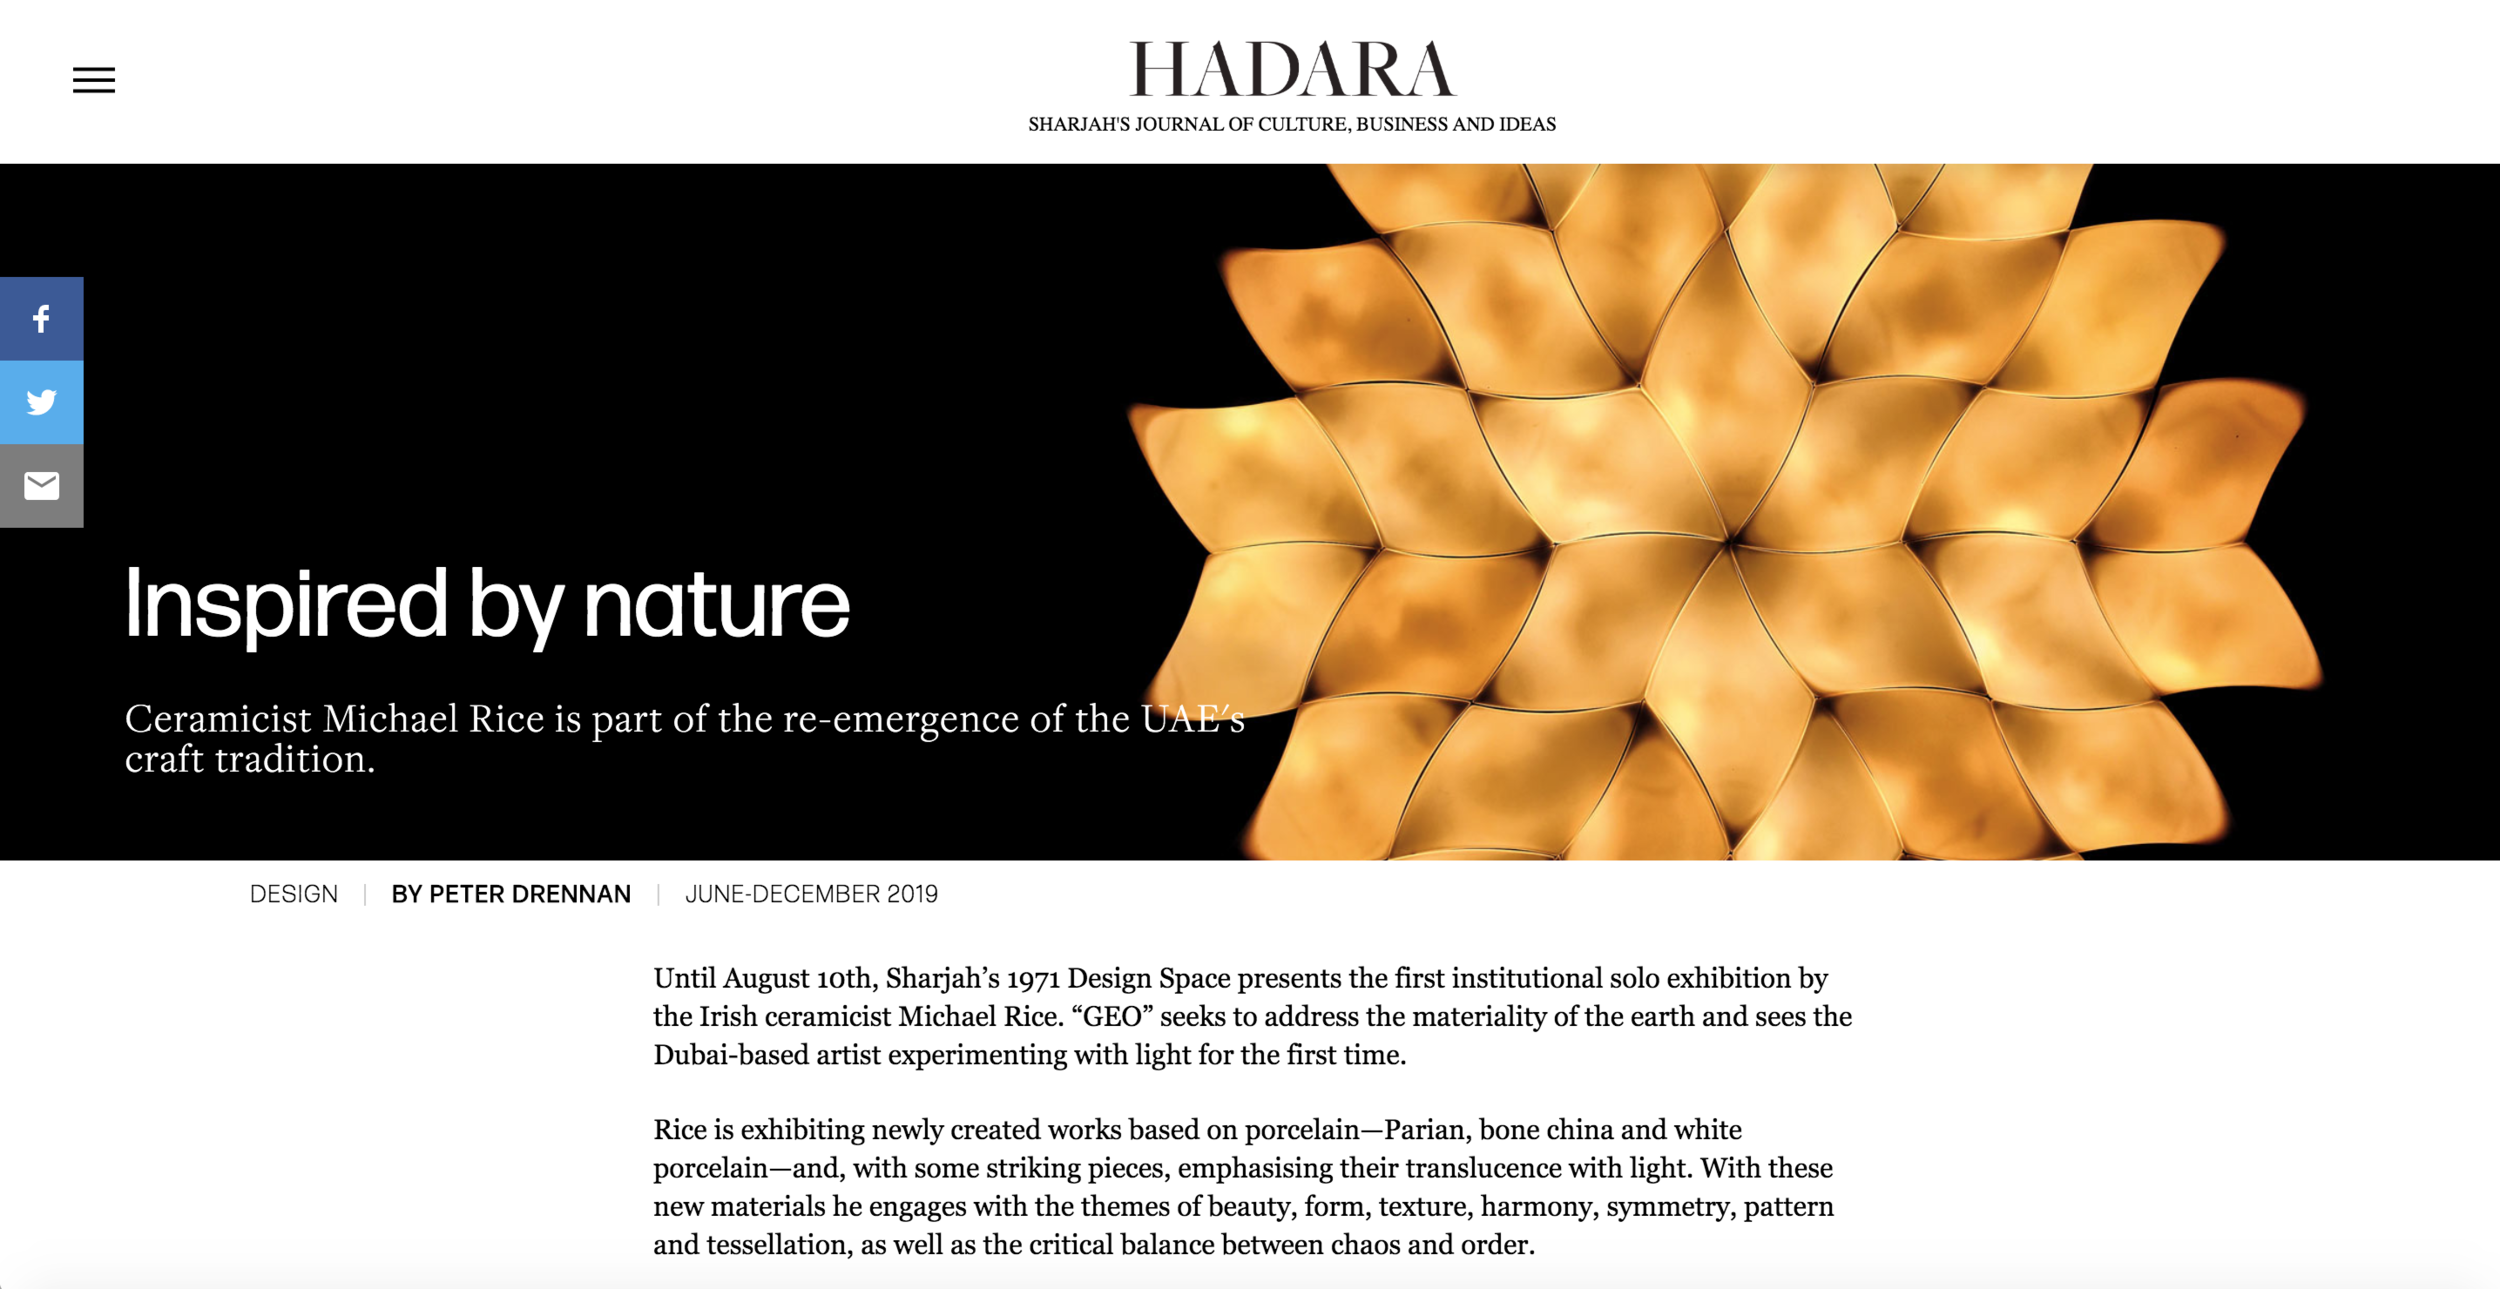  Featured in the inaugural edition of “Hadara” - SHARJAH'S JOURNAL OF CULTURE, BUSINESS AND IDEAS   https://hadaramagazine.com/june2019/michael-rice/   